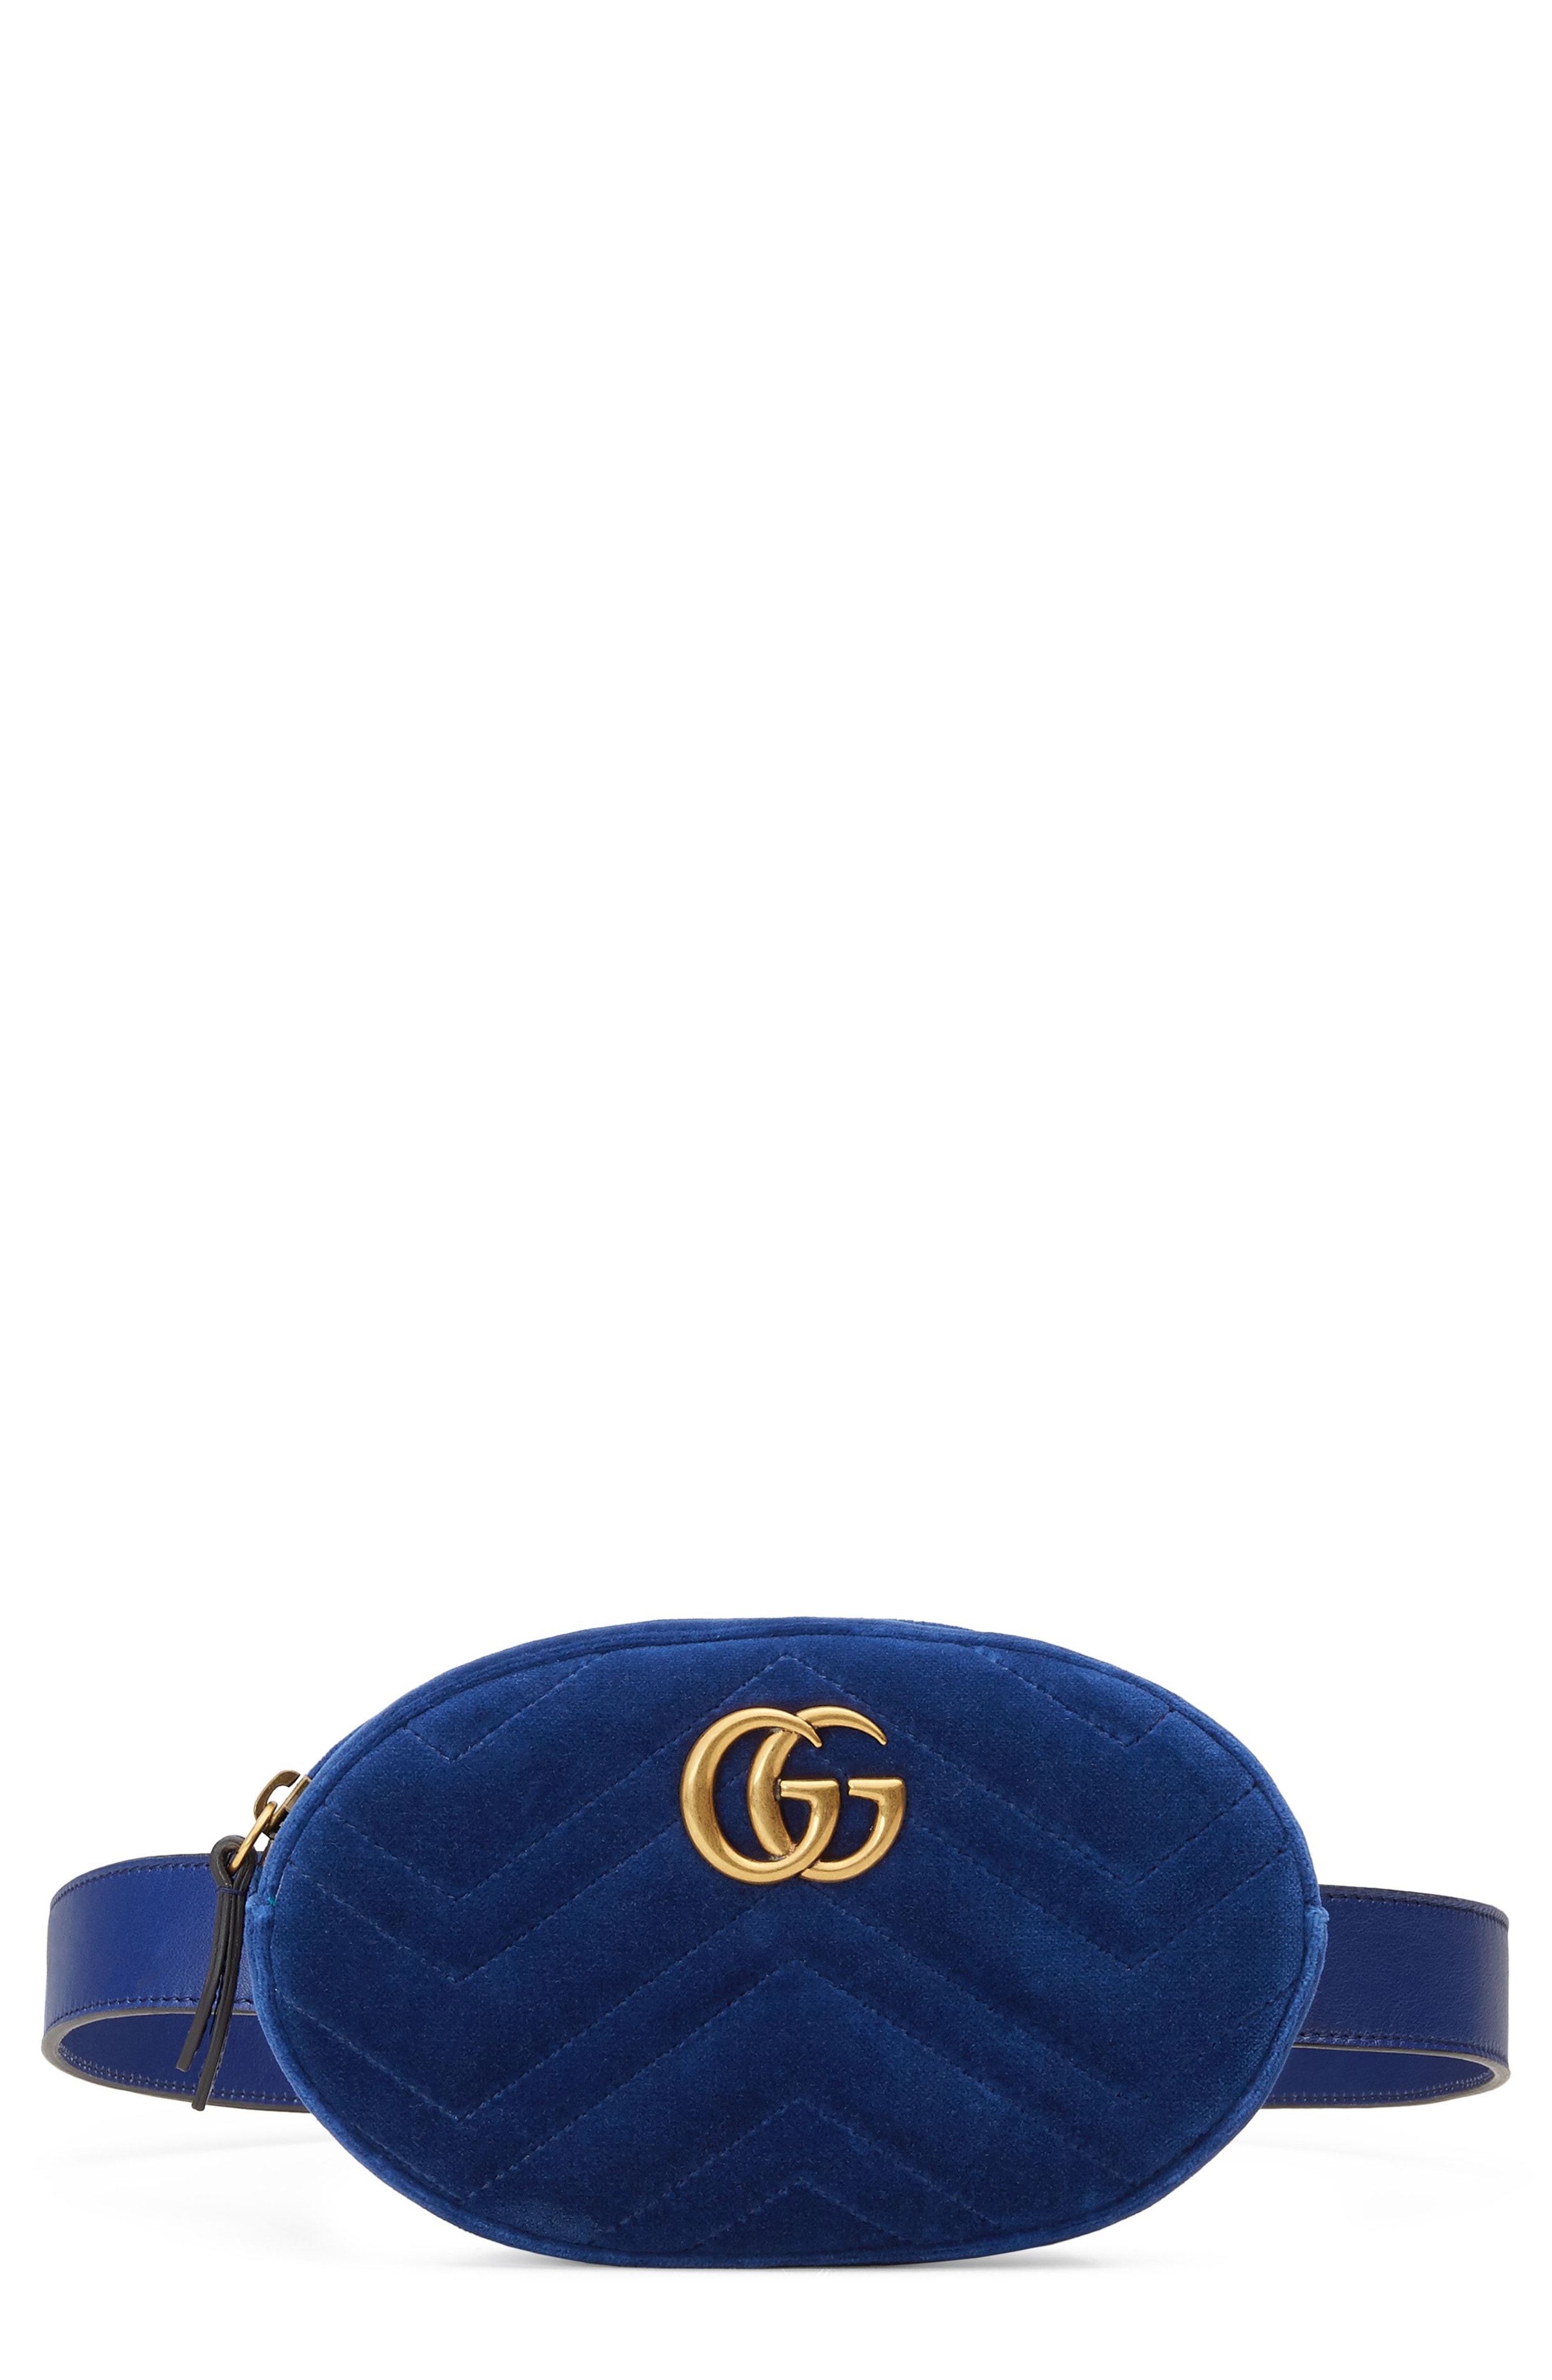 GUCCI x North Face Belt Bag in Ivory | COCOON